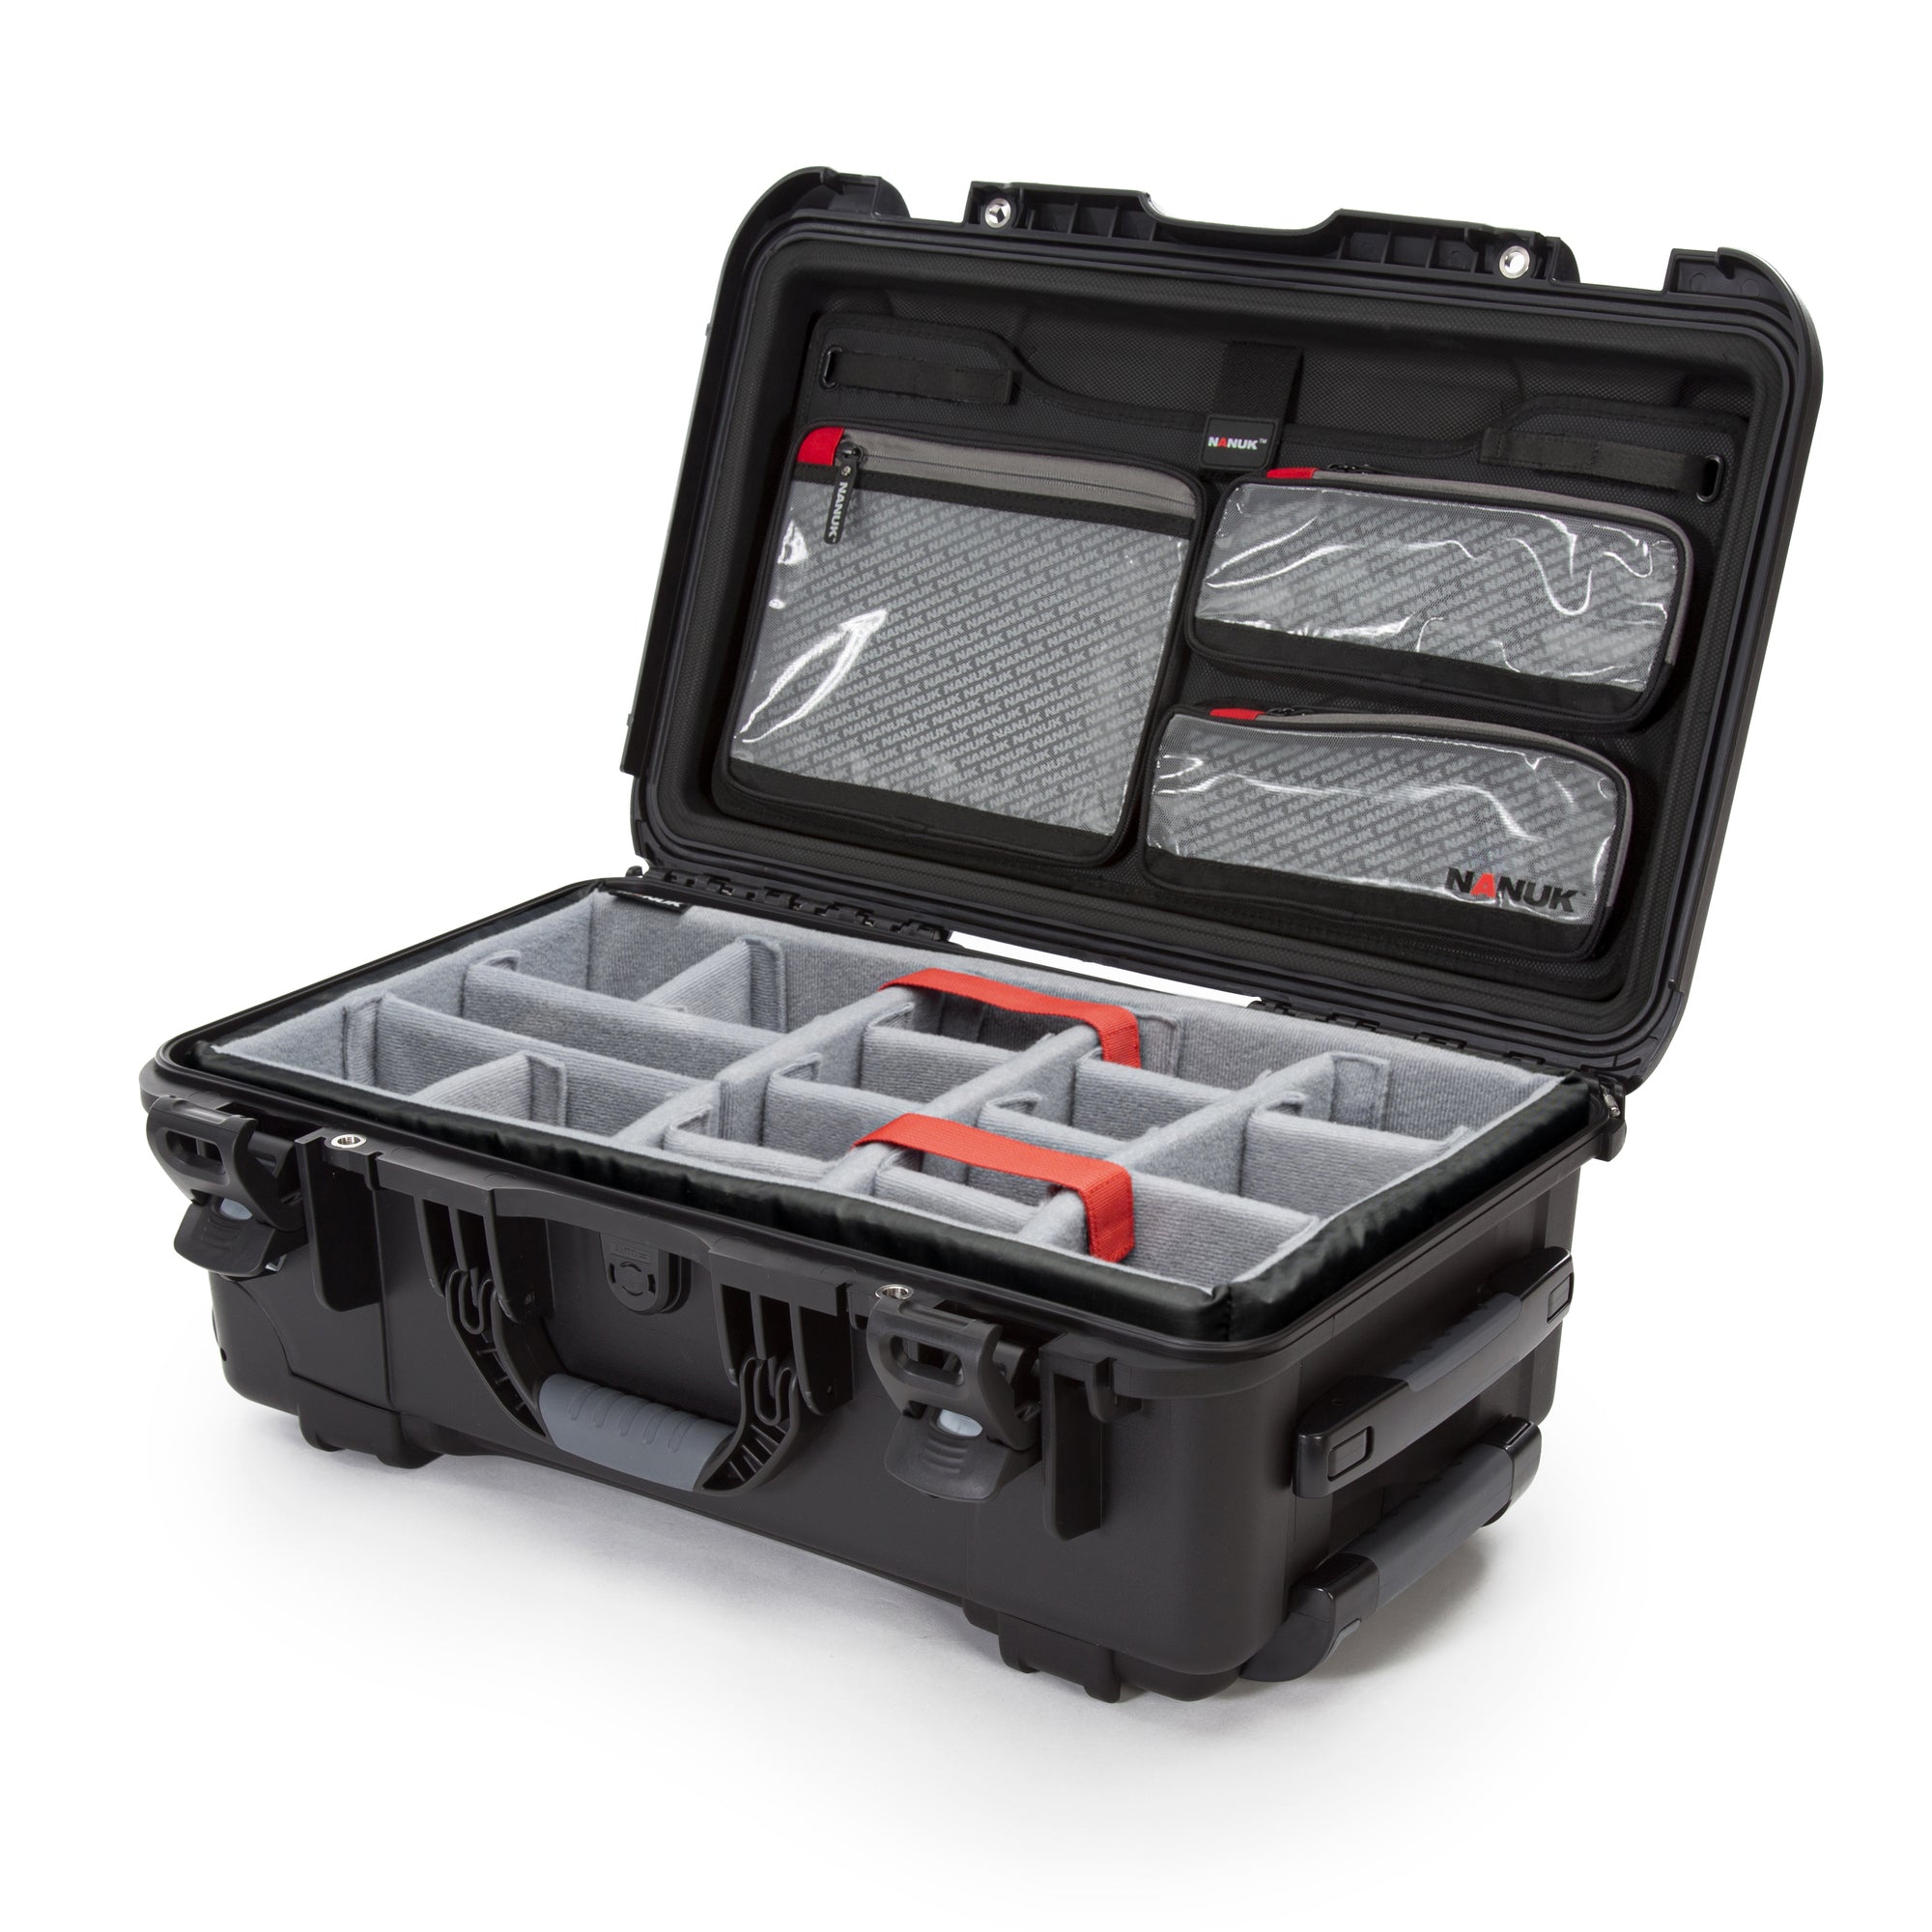 NANUK-R 935: Eco-Friendly Hard Plastic Case with Recycled Resin Components Black / Pro Photo Kit